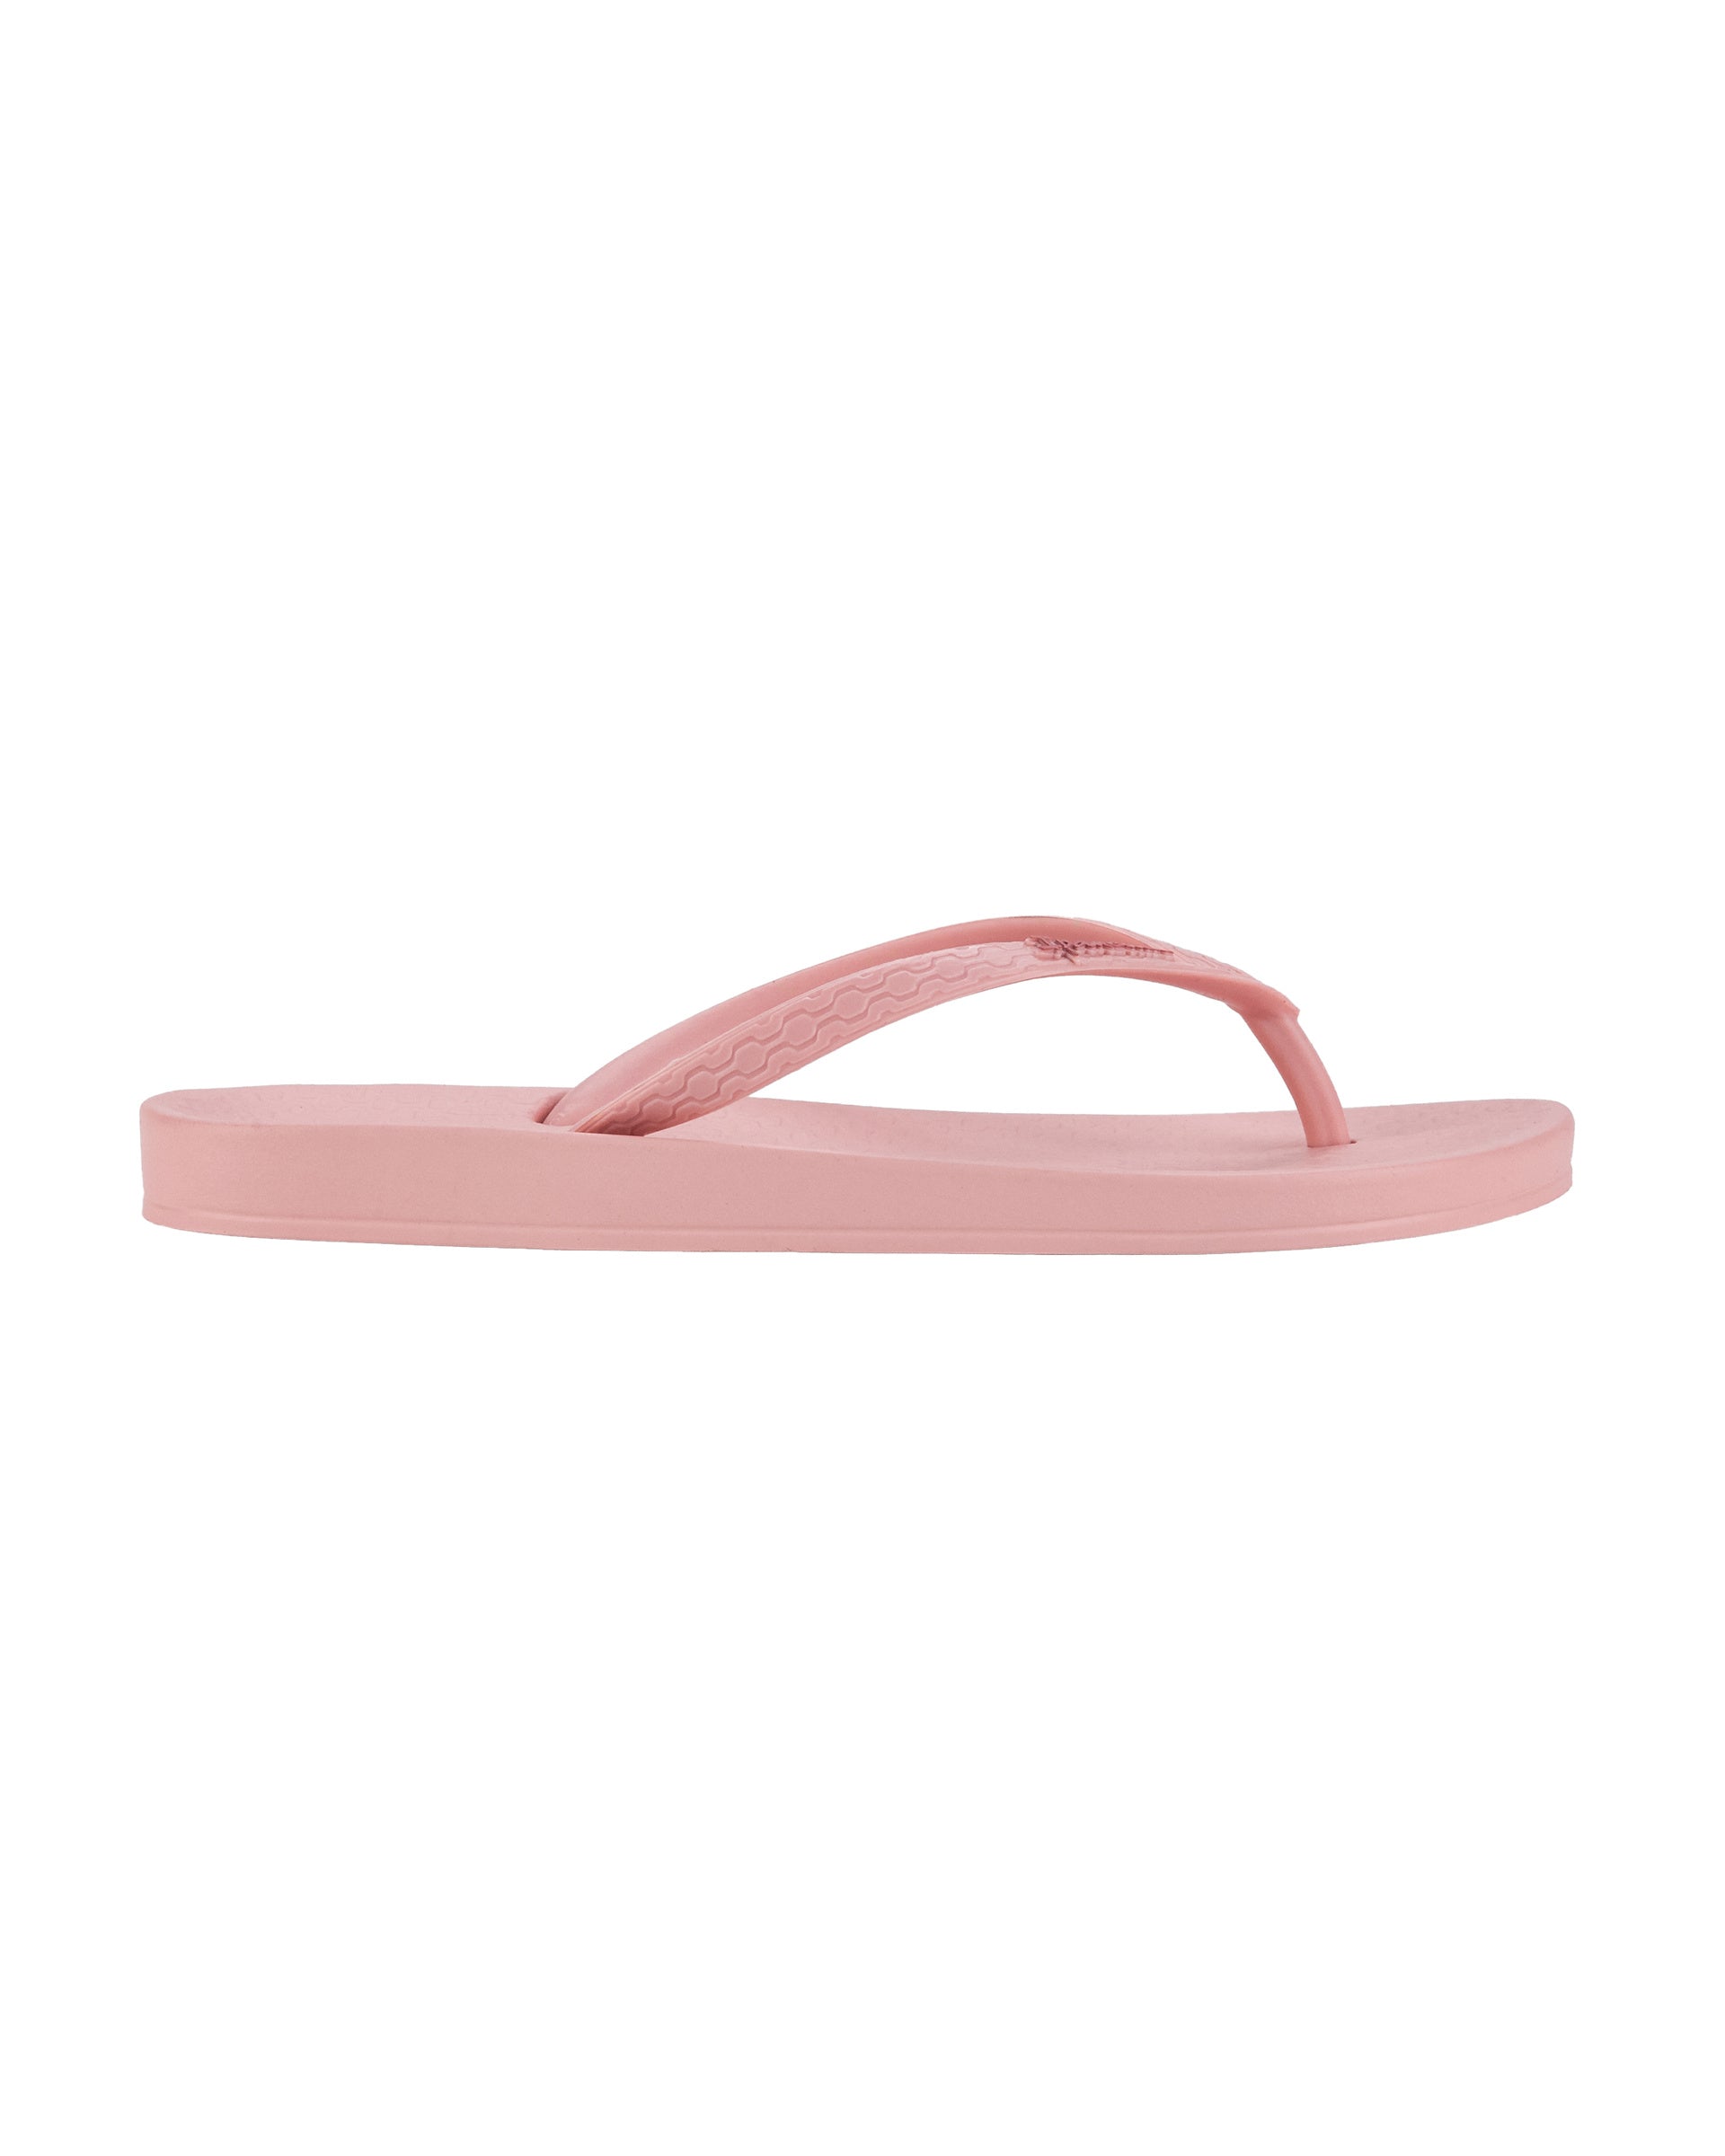 Outer side view of a pink Ipanema Ana Colors women's flip flop.